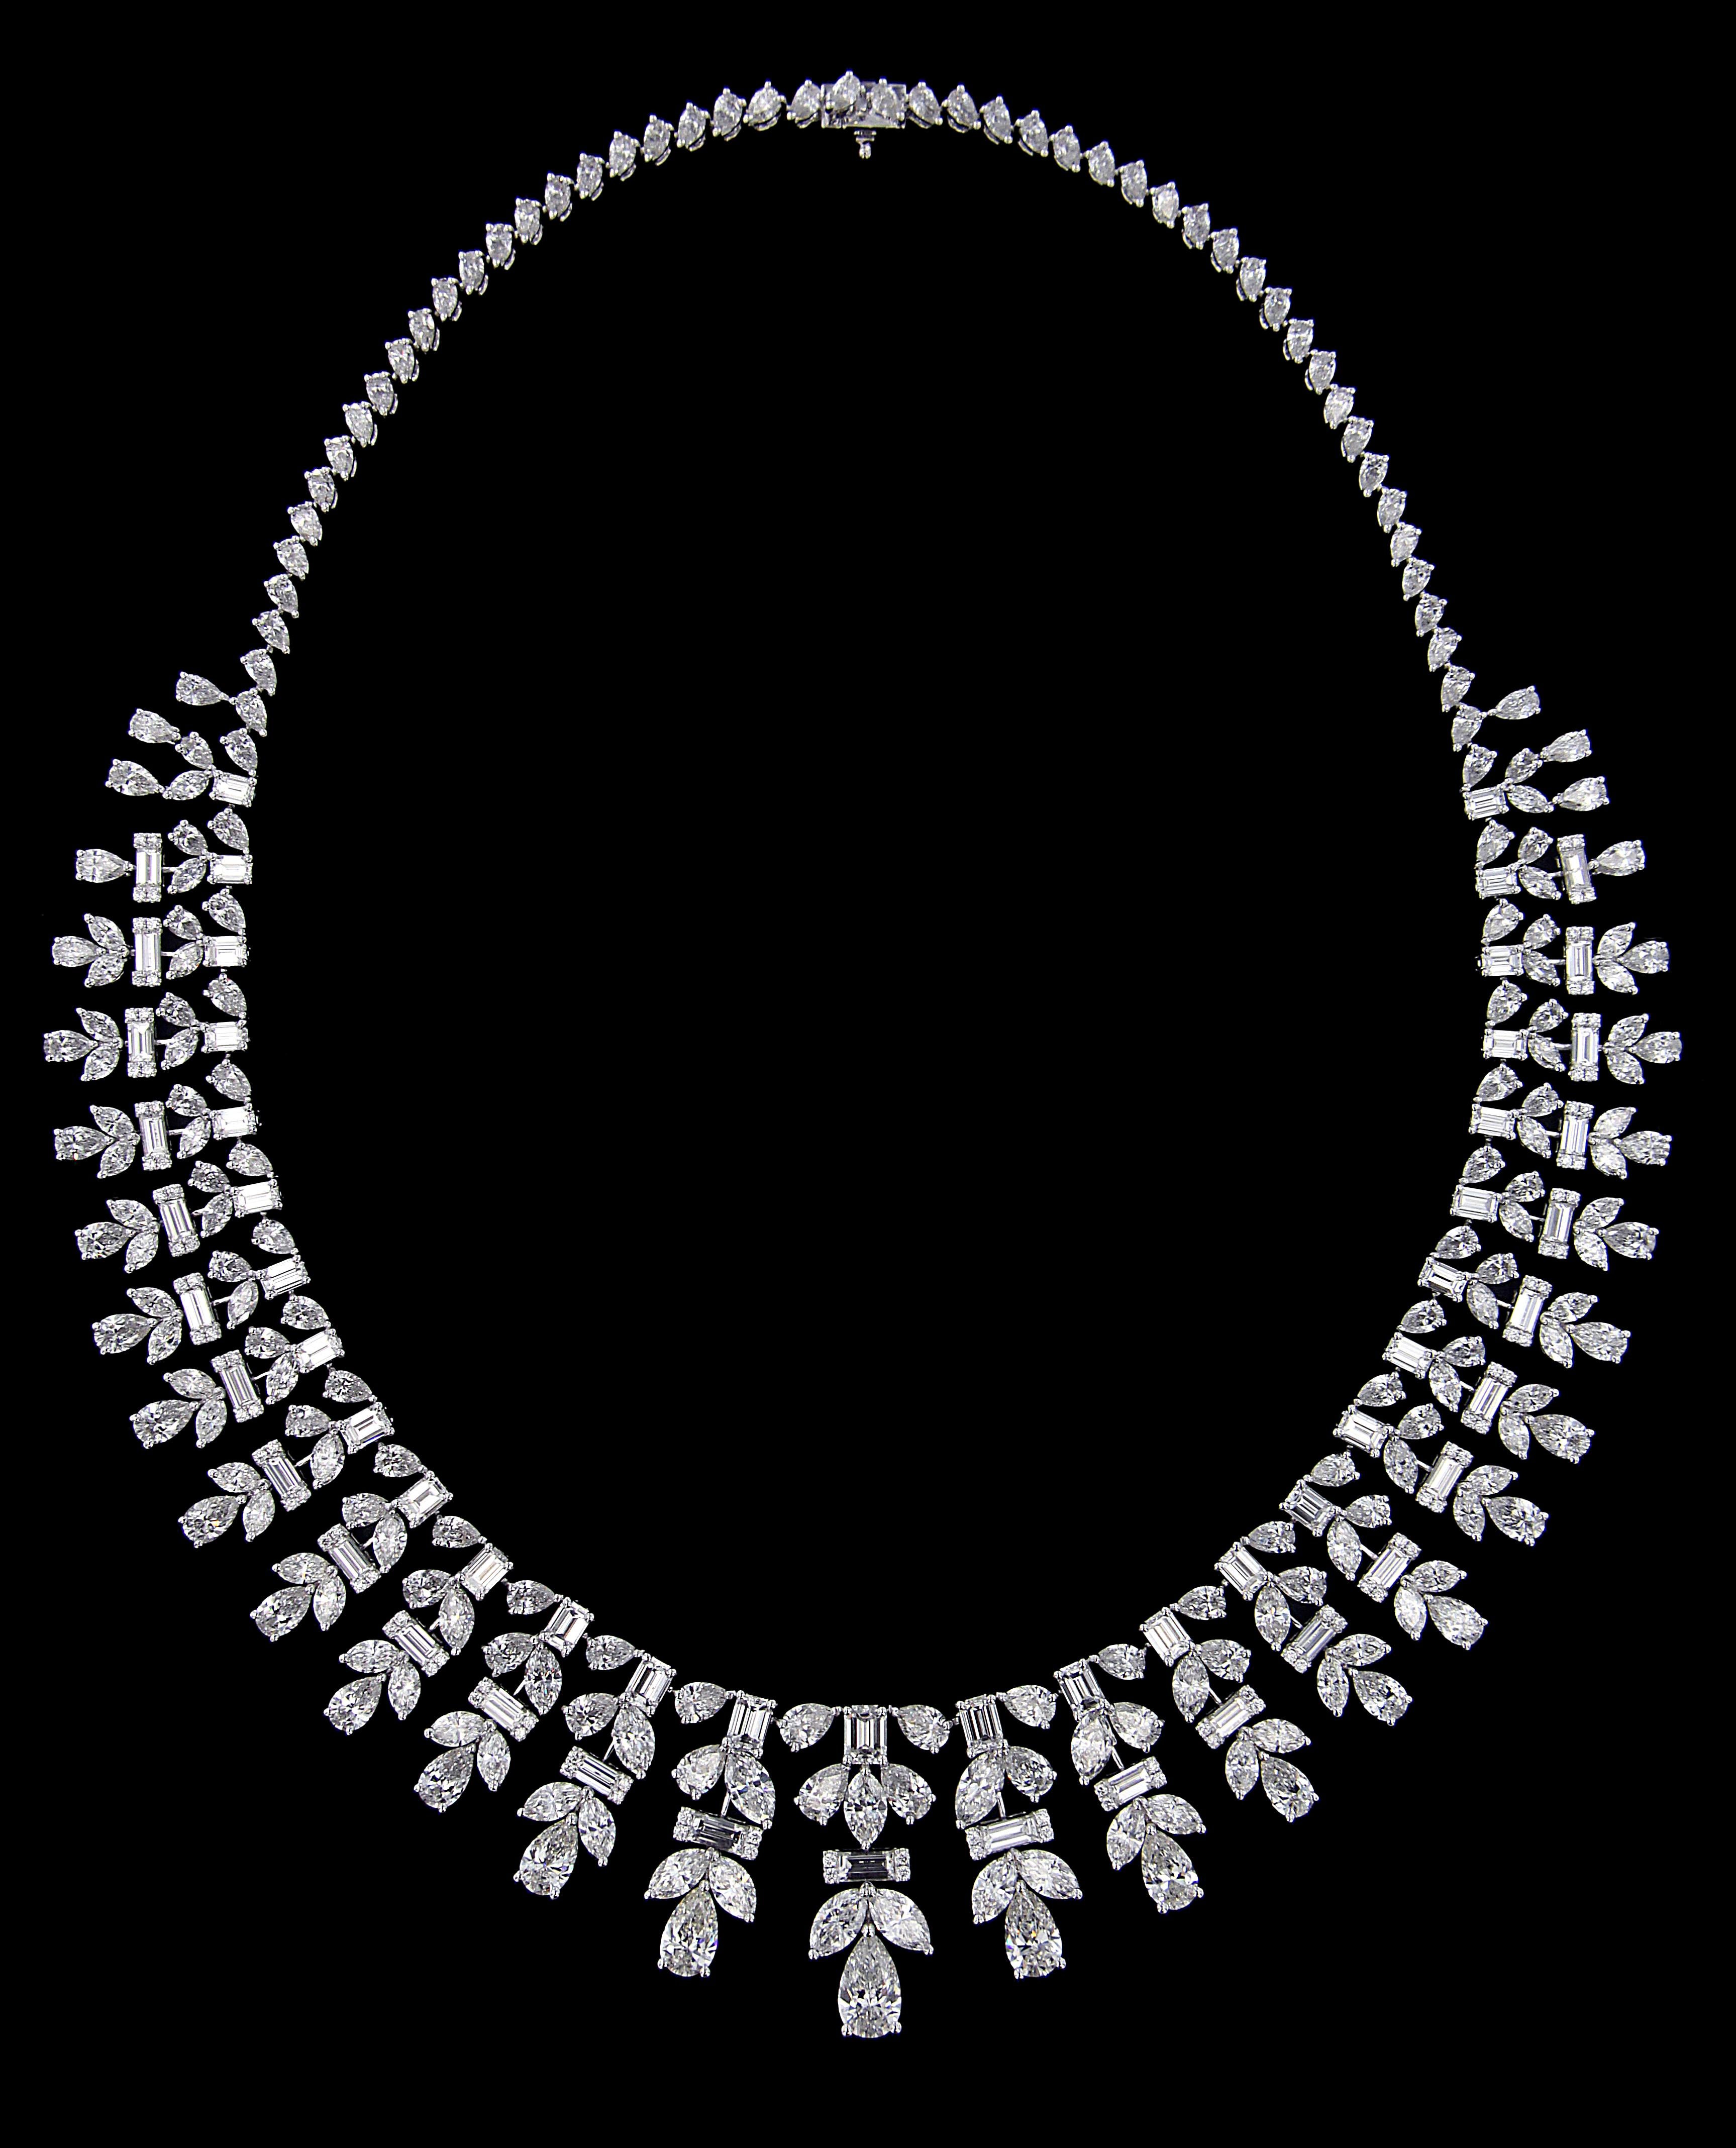 Sumptuous White Gold And Diamond Wedding  Set :
Necklace:
Multi shaped Diamonds weighing approximately around 47.075 carats, mounted on 18 karat white gold necklace. The necklace weighs around 52.475 grams approximately.  
 

Please note: The prices